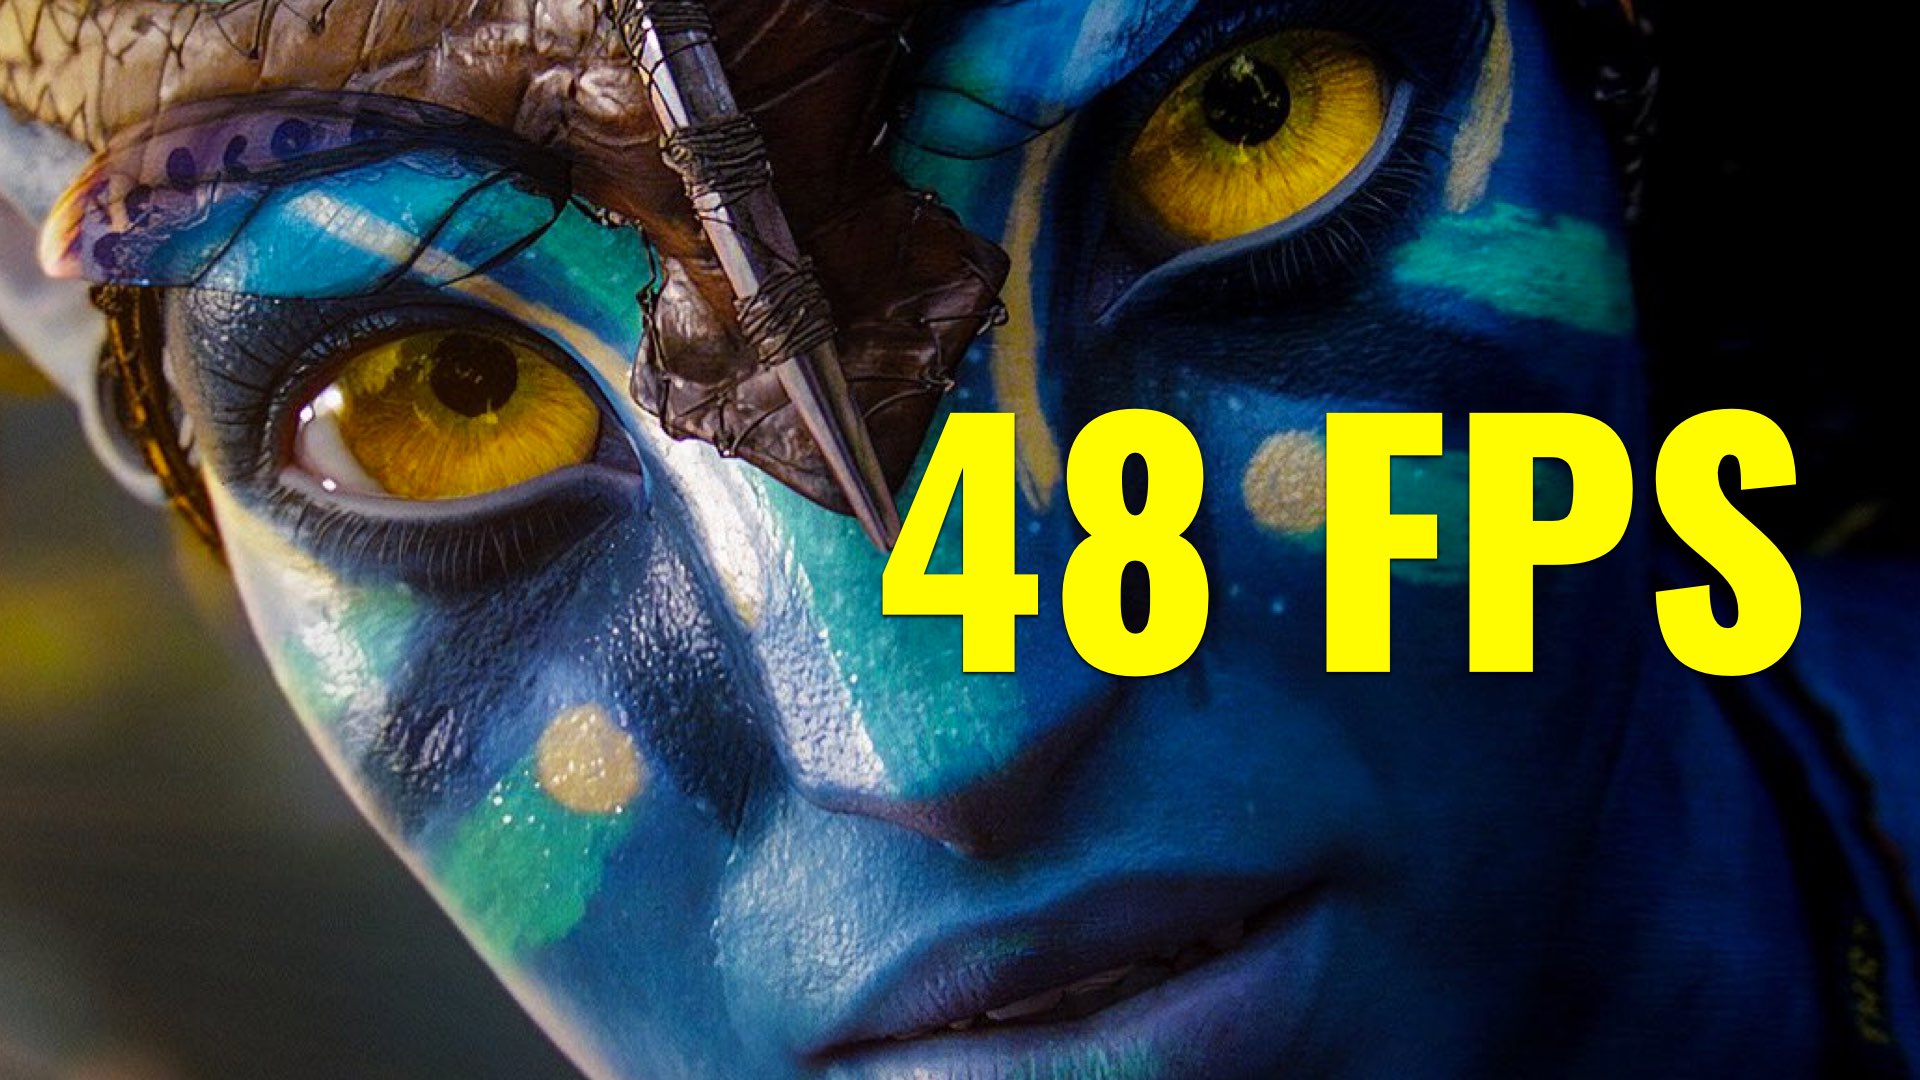 James Cameron Applied 48 FPS in the Remastered Avatar